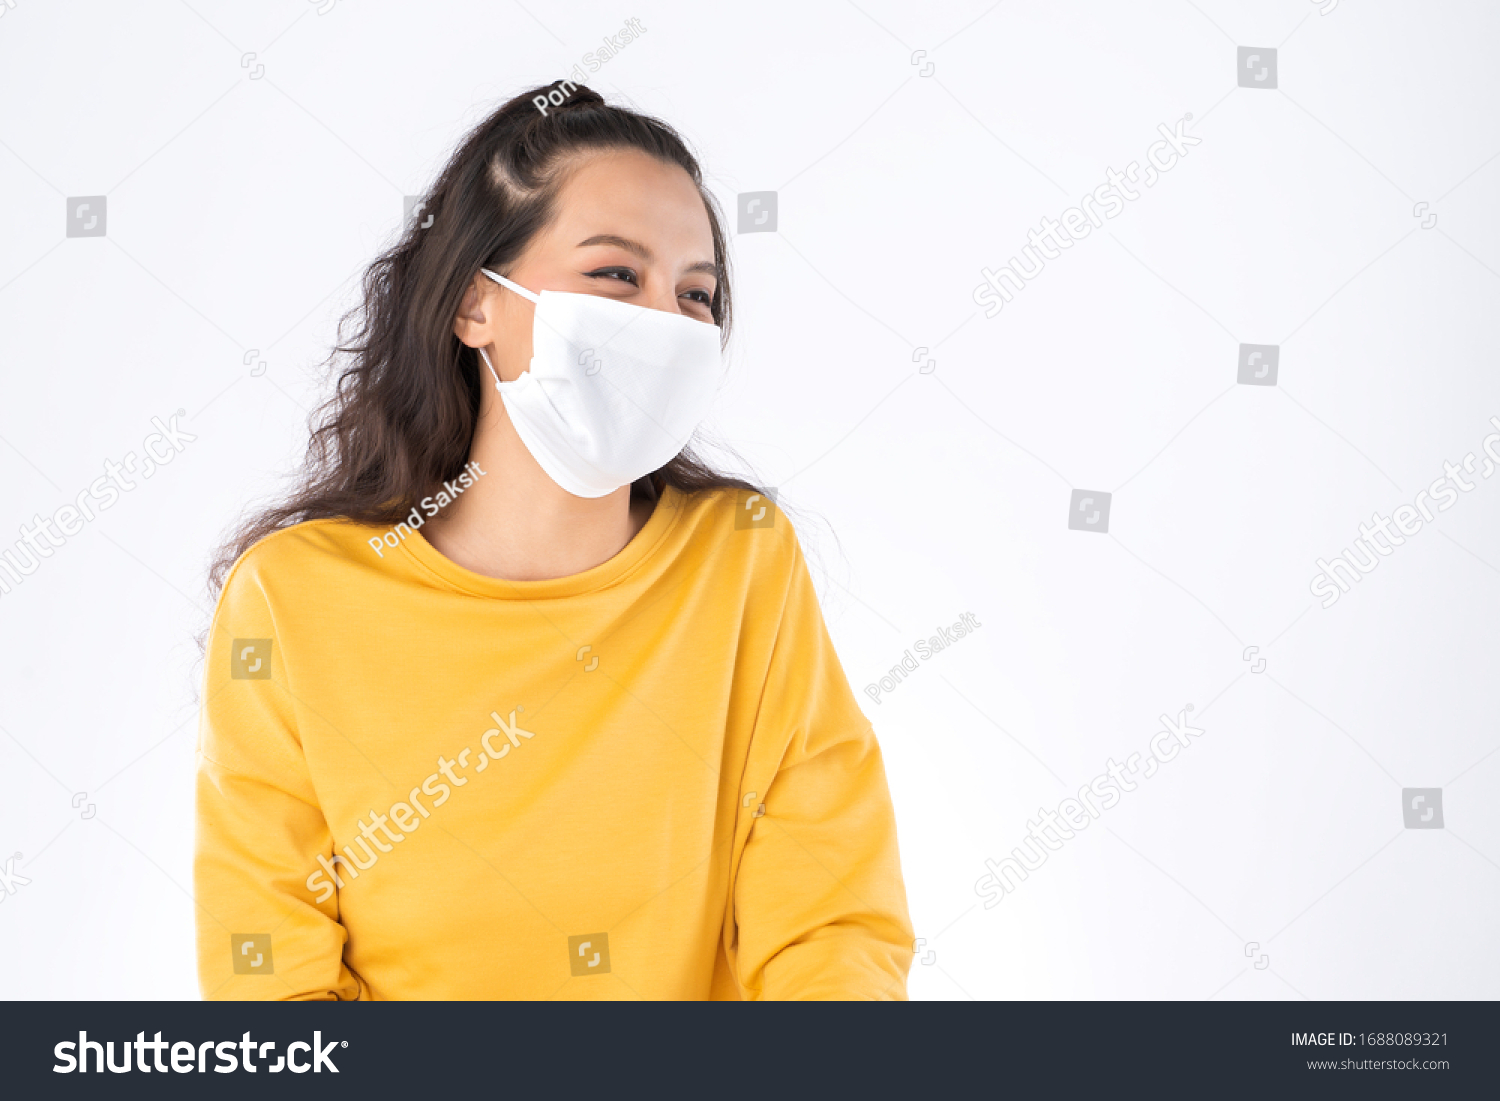 Young happy Asian woman wearing hygienic mask to prevent infection corona virus Air pollution pm2.5 she wearing a yellow sweater shoot in shot isolated on white background #1688089321